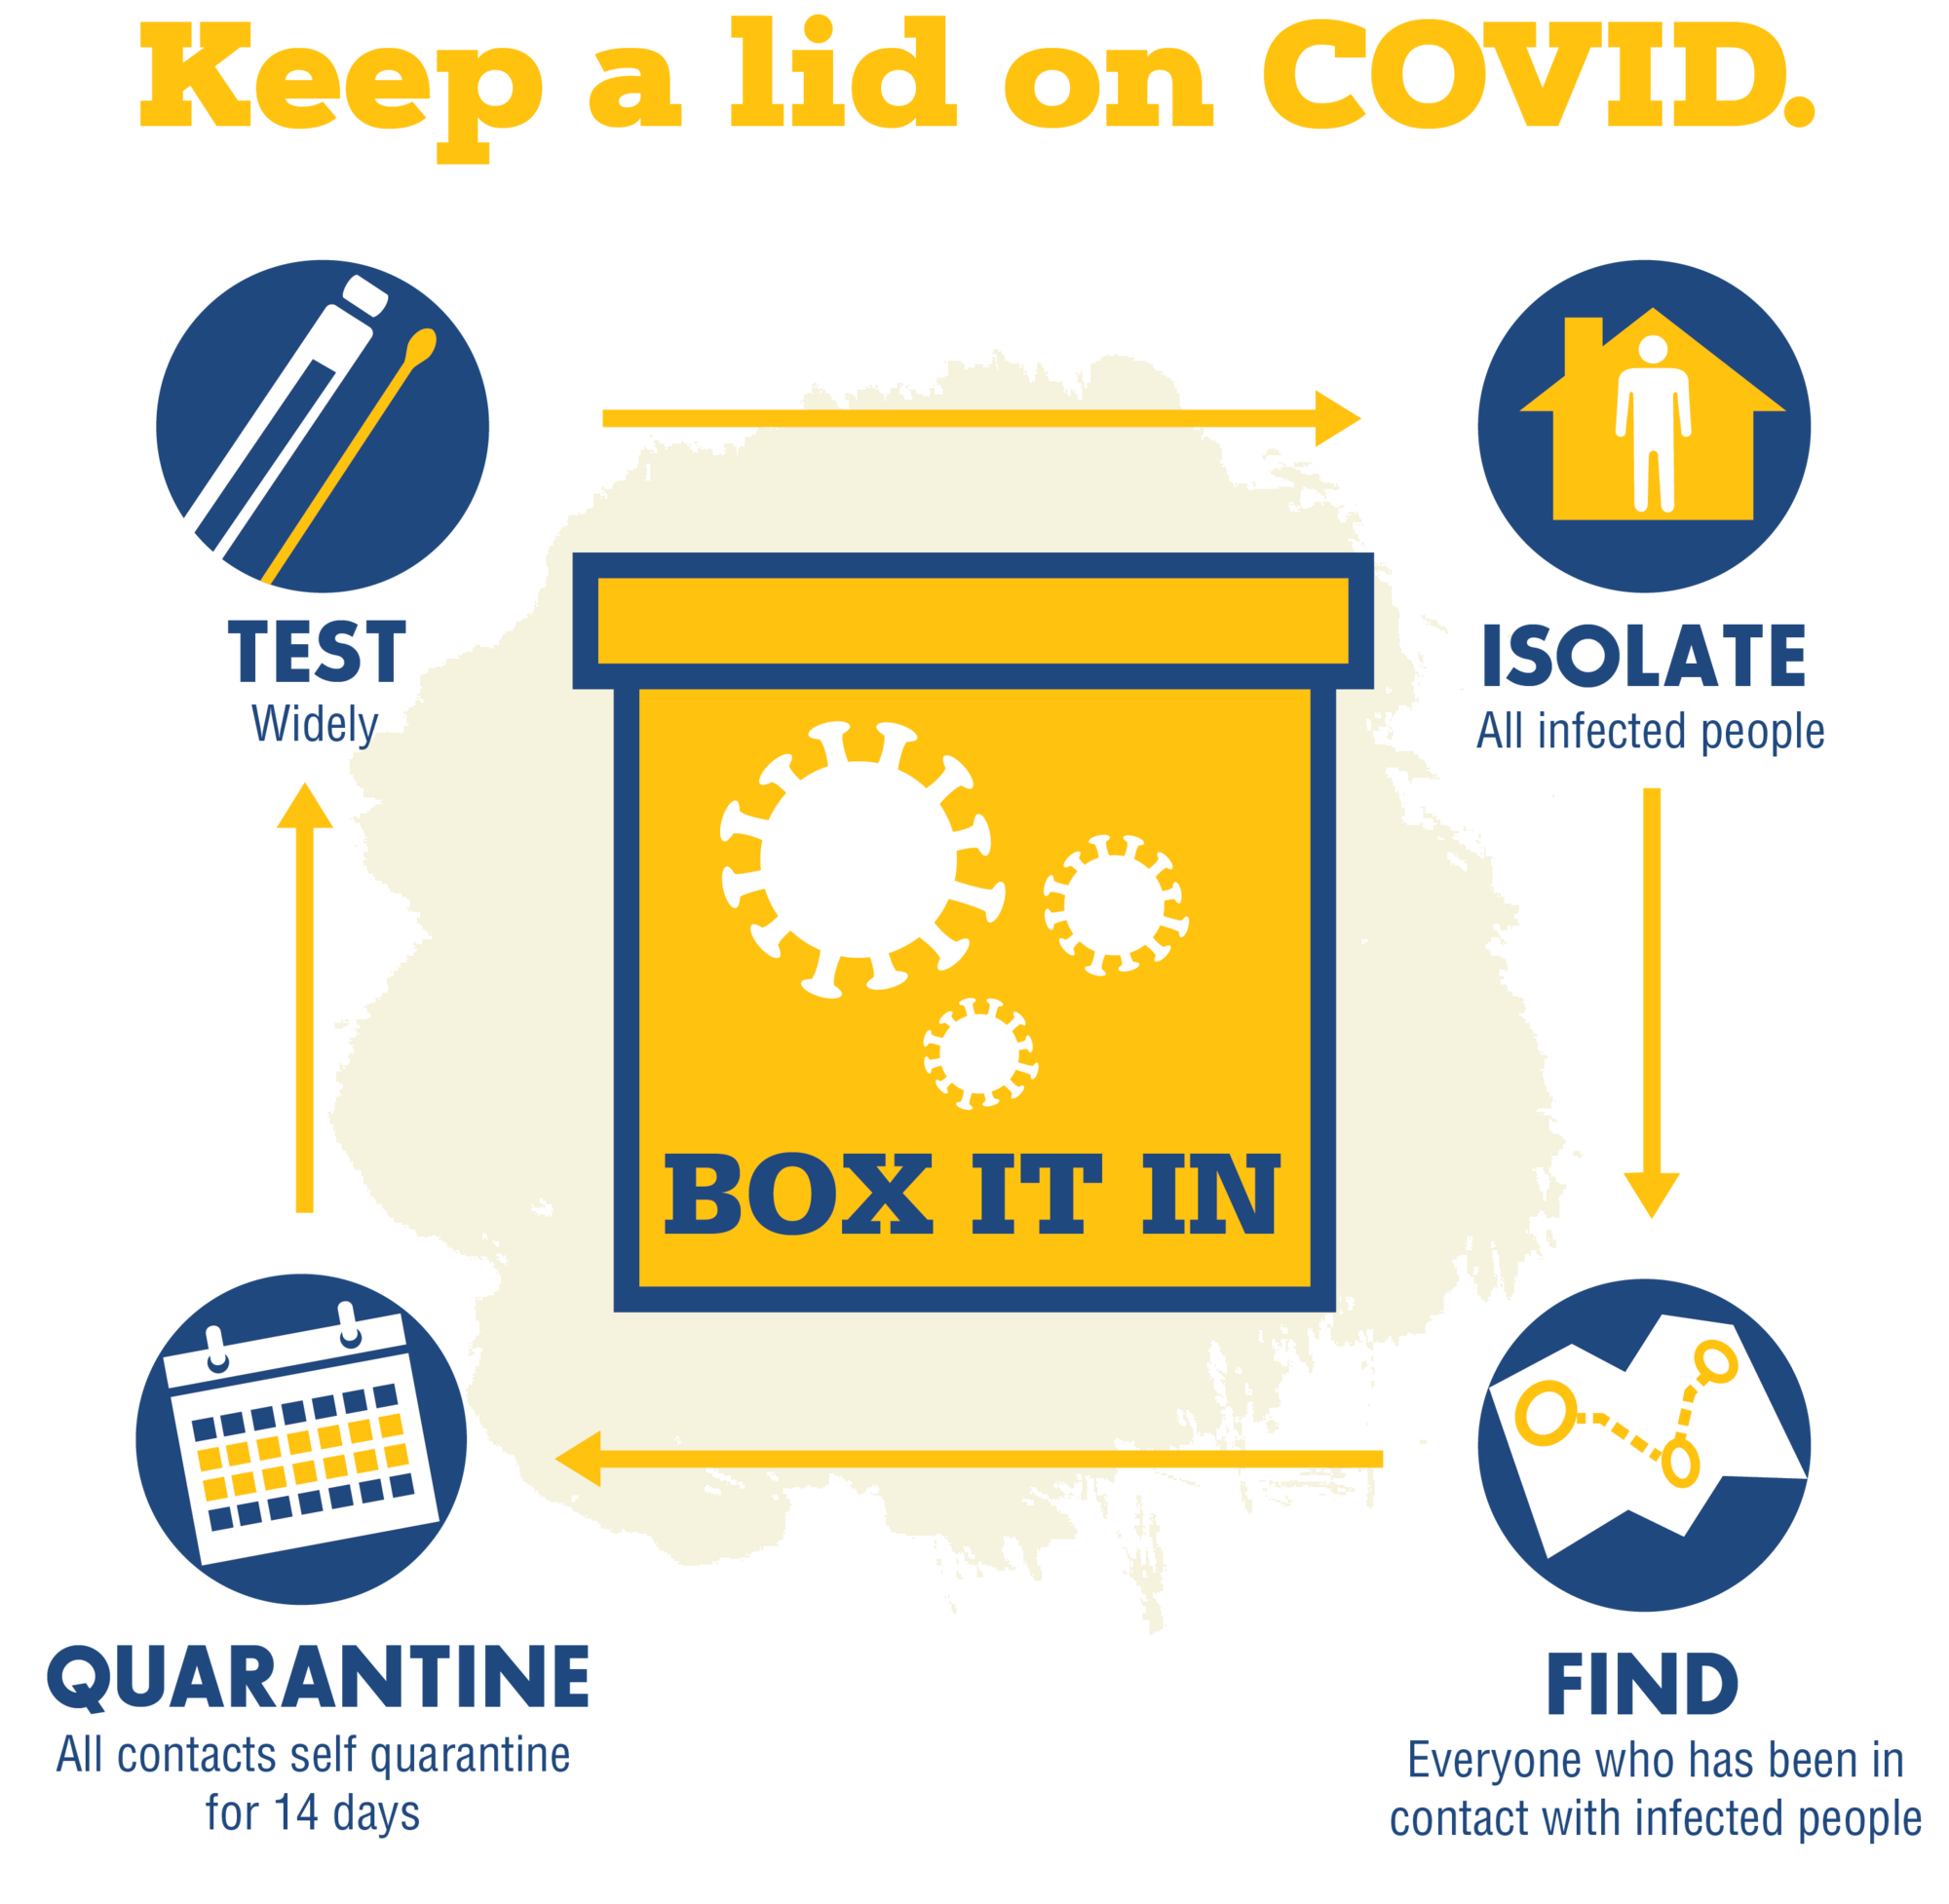 Box the virus in: Find, Test, Isolate and Quarantine 